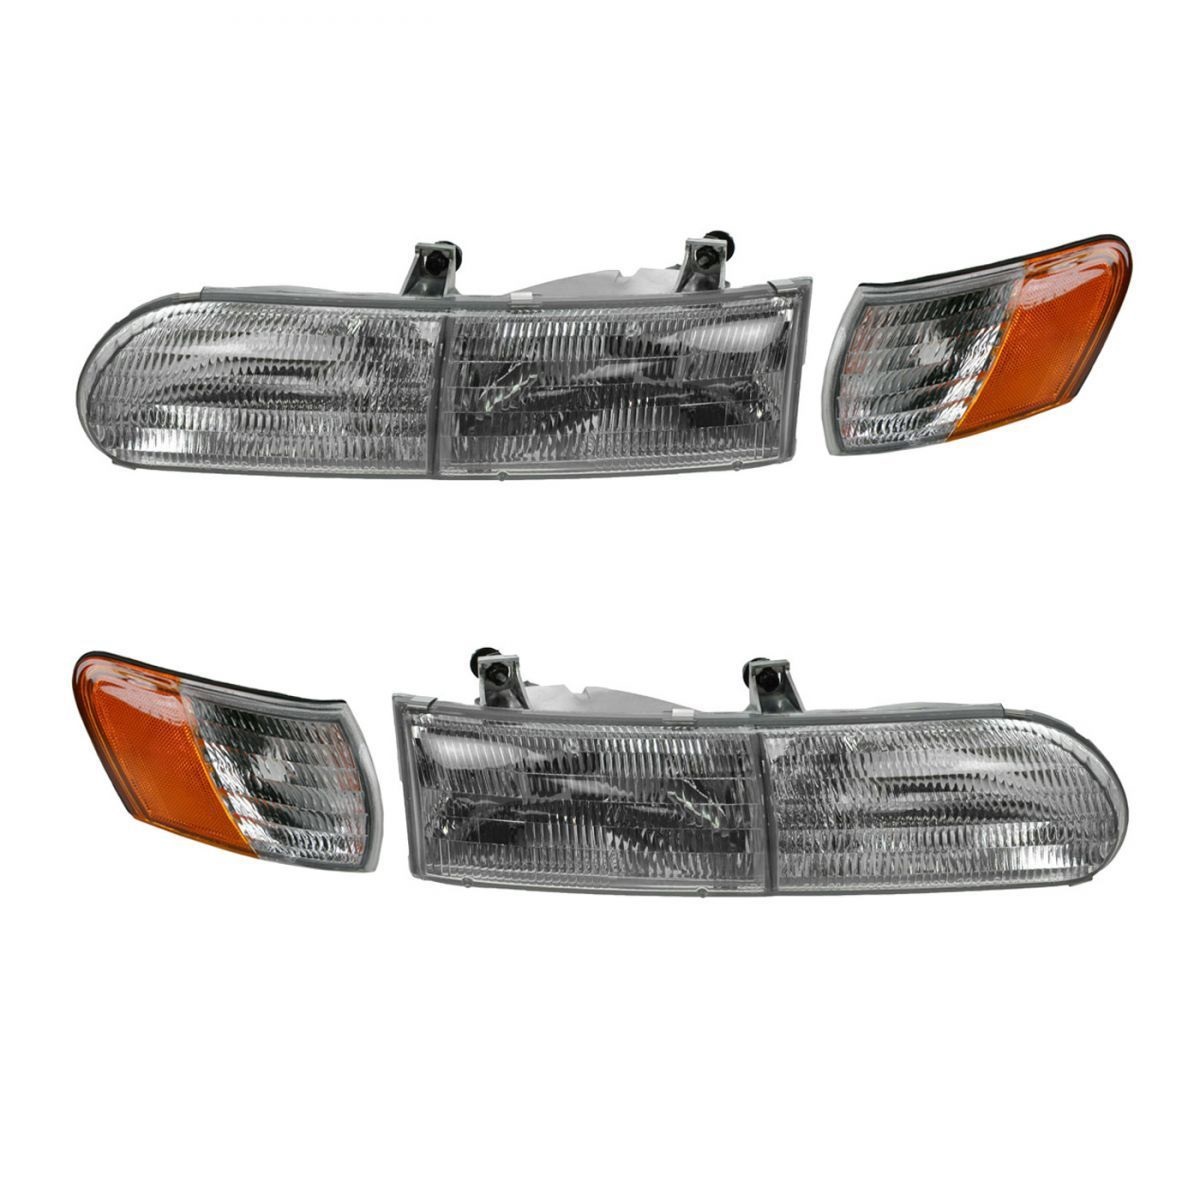 Gulf Stream Yellowstone Replacement Headlights and Corner Turn Signal Lamps (4 Piece Set) (Left & Right)